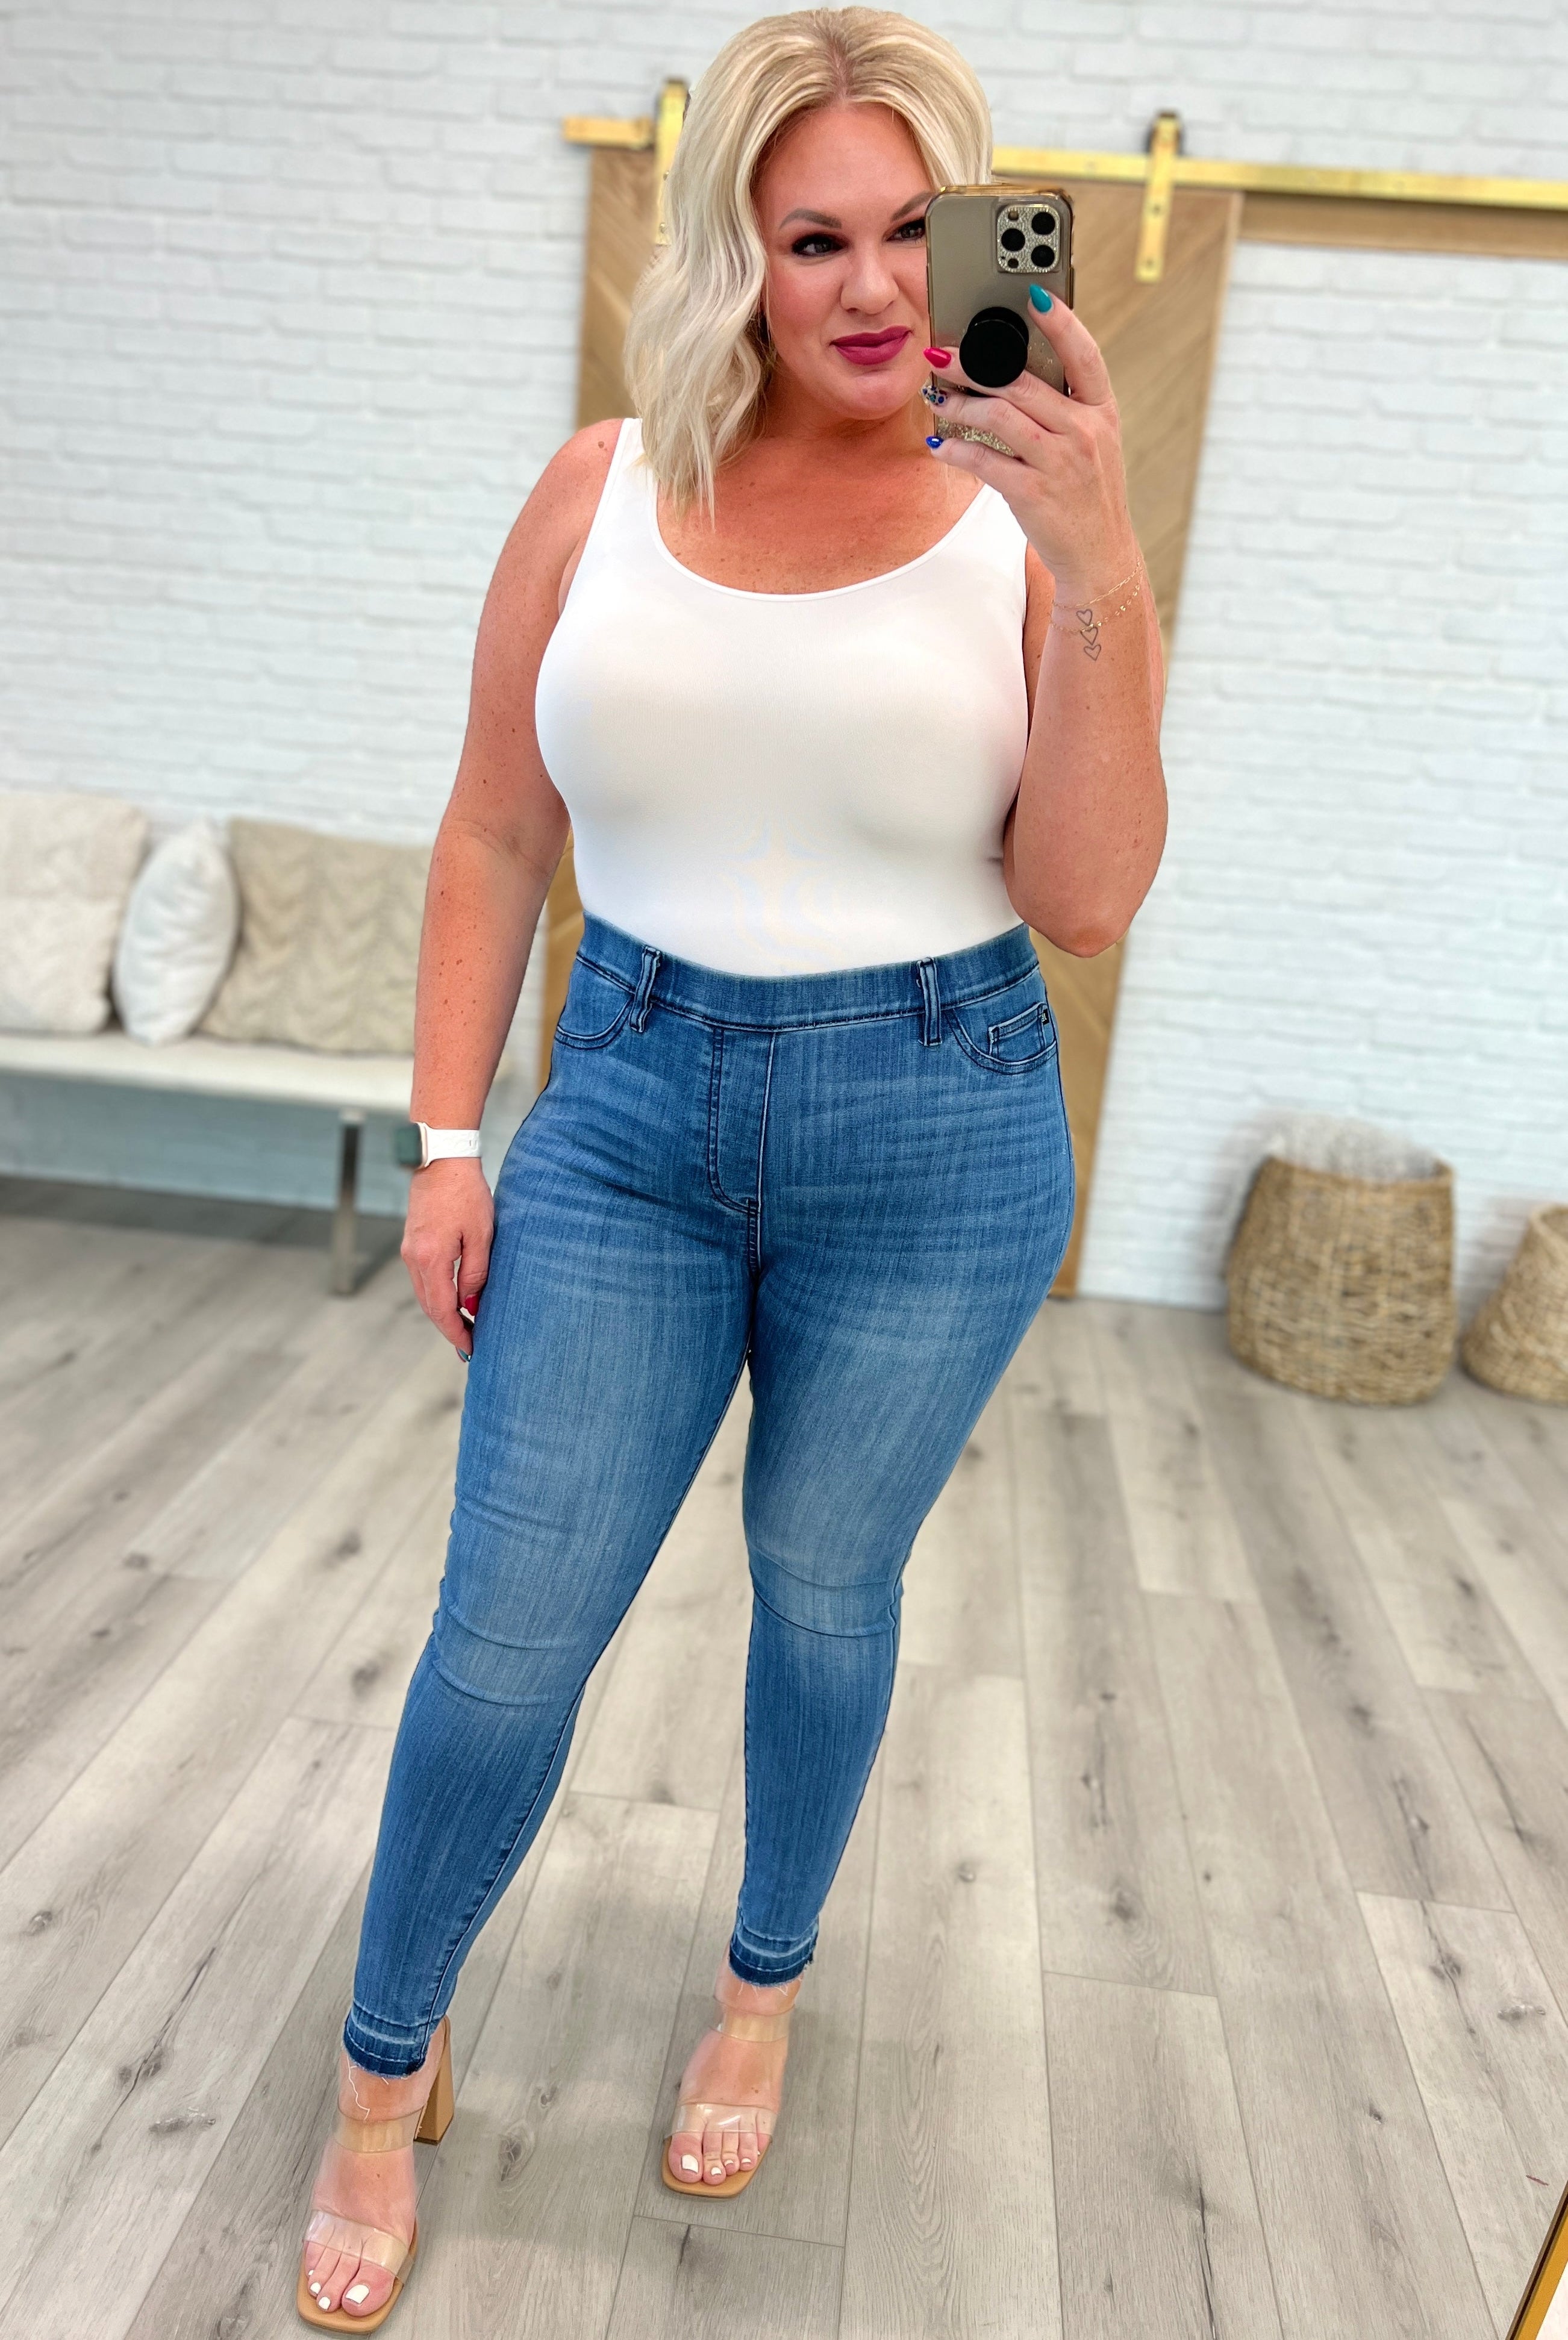 Amanda High Rise Pull on Release Hem Skinny Jeans-Jeans- Simply Simpson's Boutique is a Women's Online Fashion Boutique Located in Jupiter, Florida